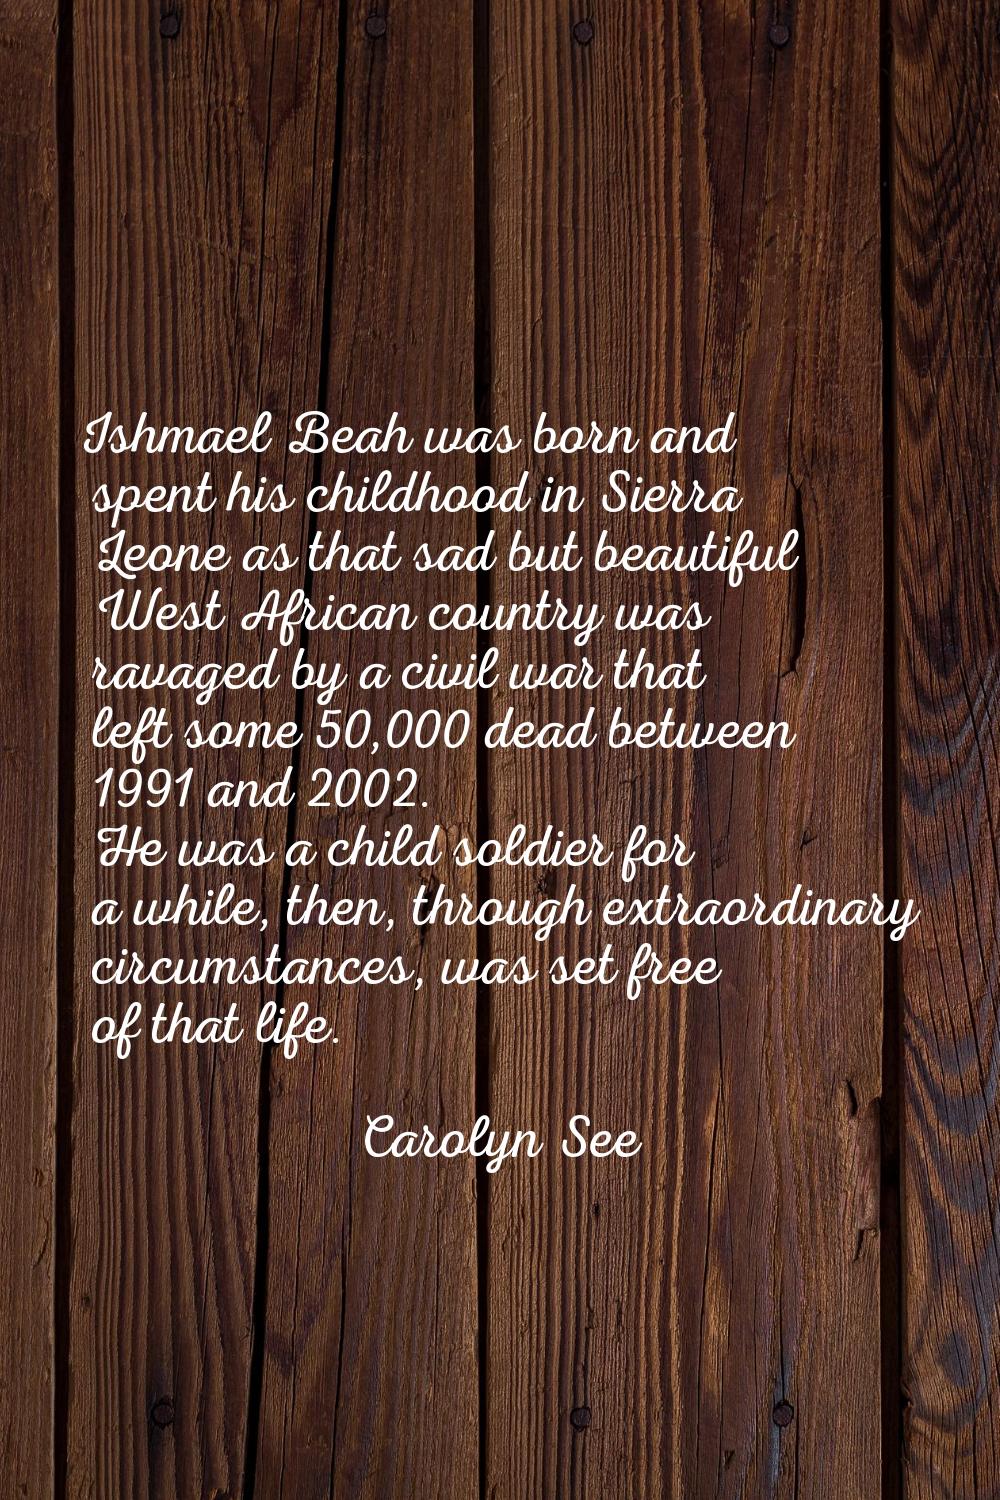 Ishmael Beah was born and spent his childhood in Sierra Leone as that sad but beautiful West Africa